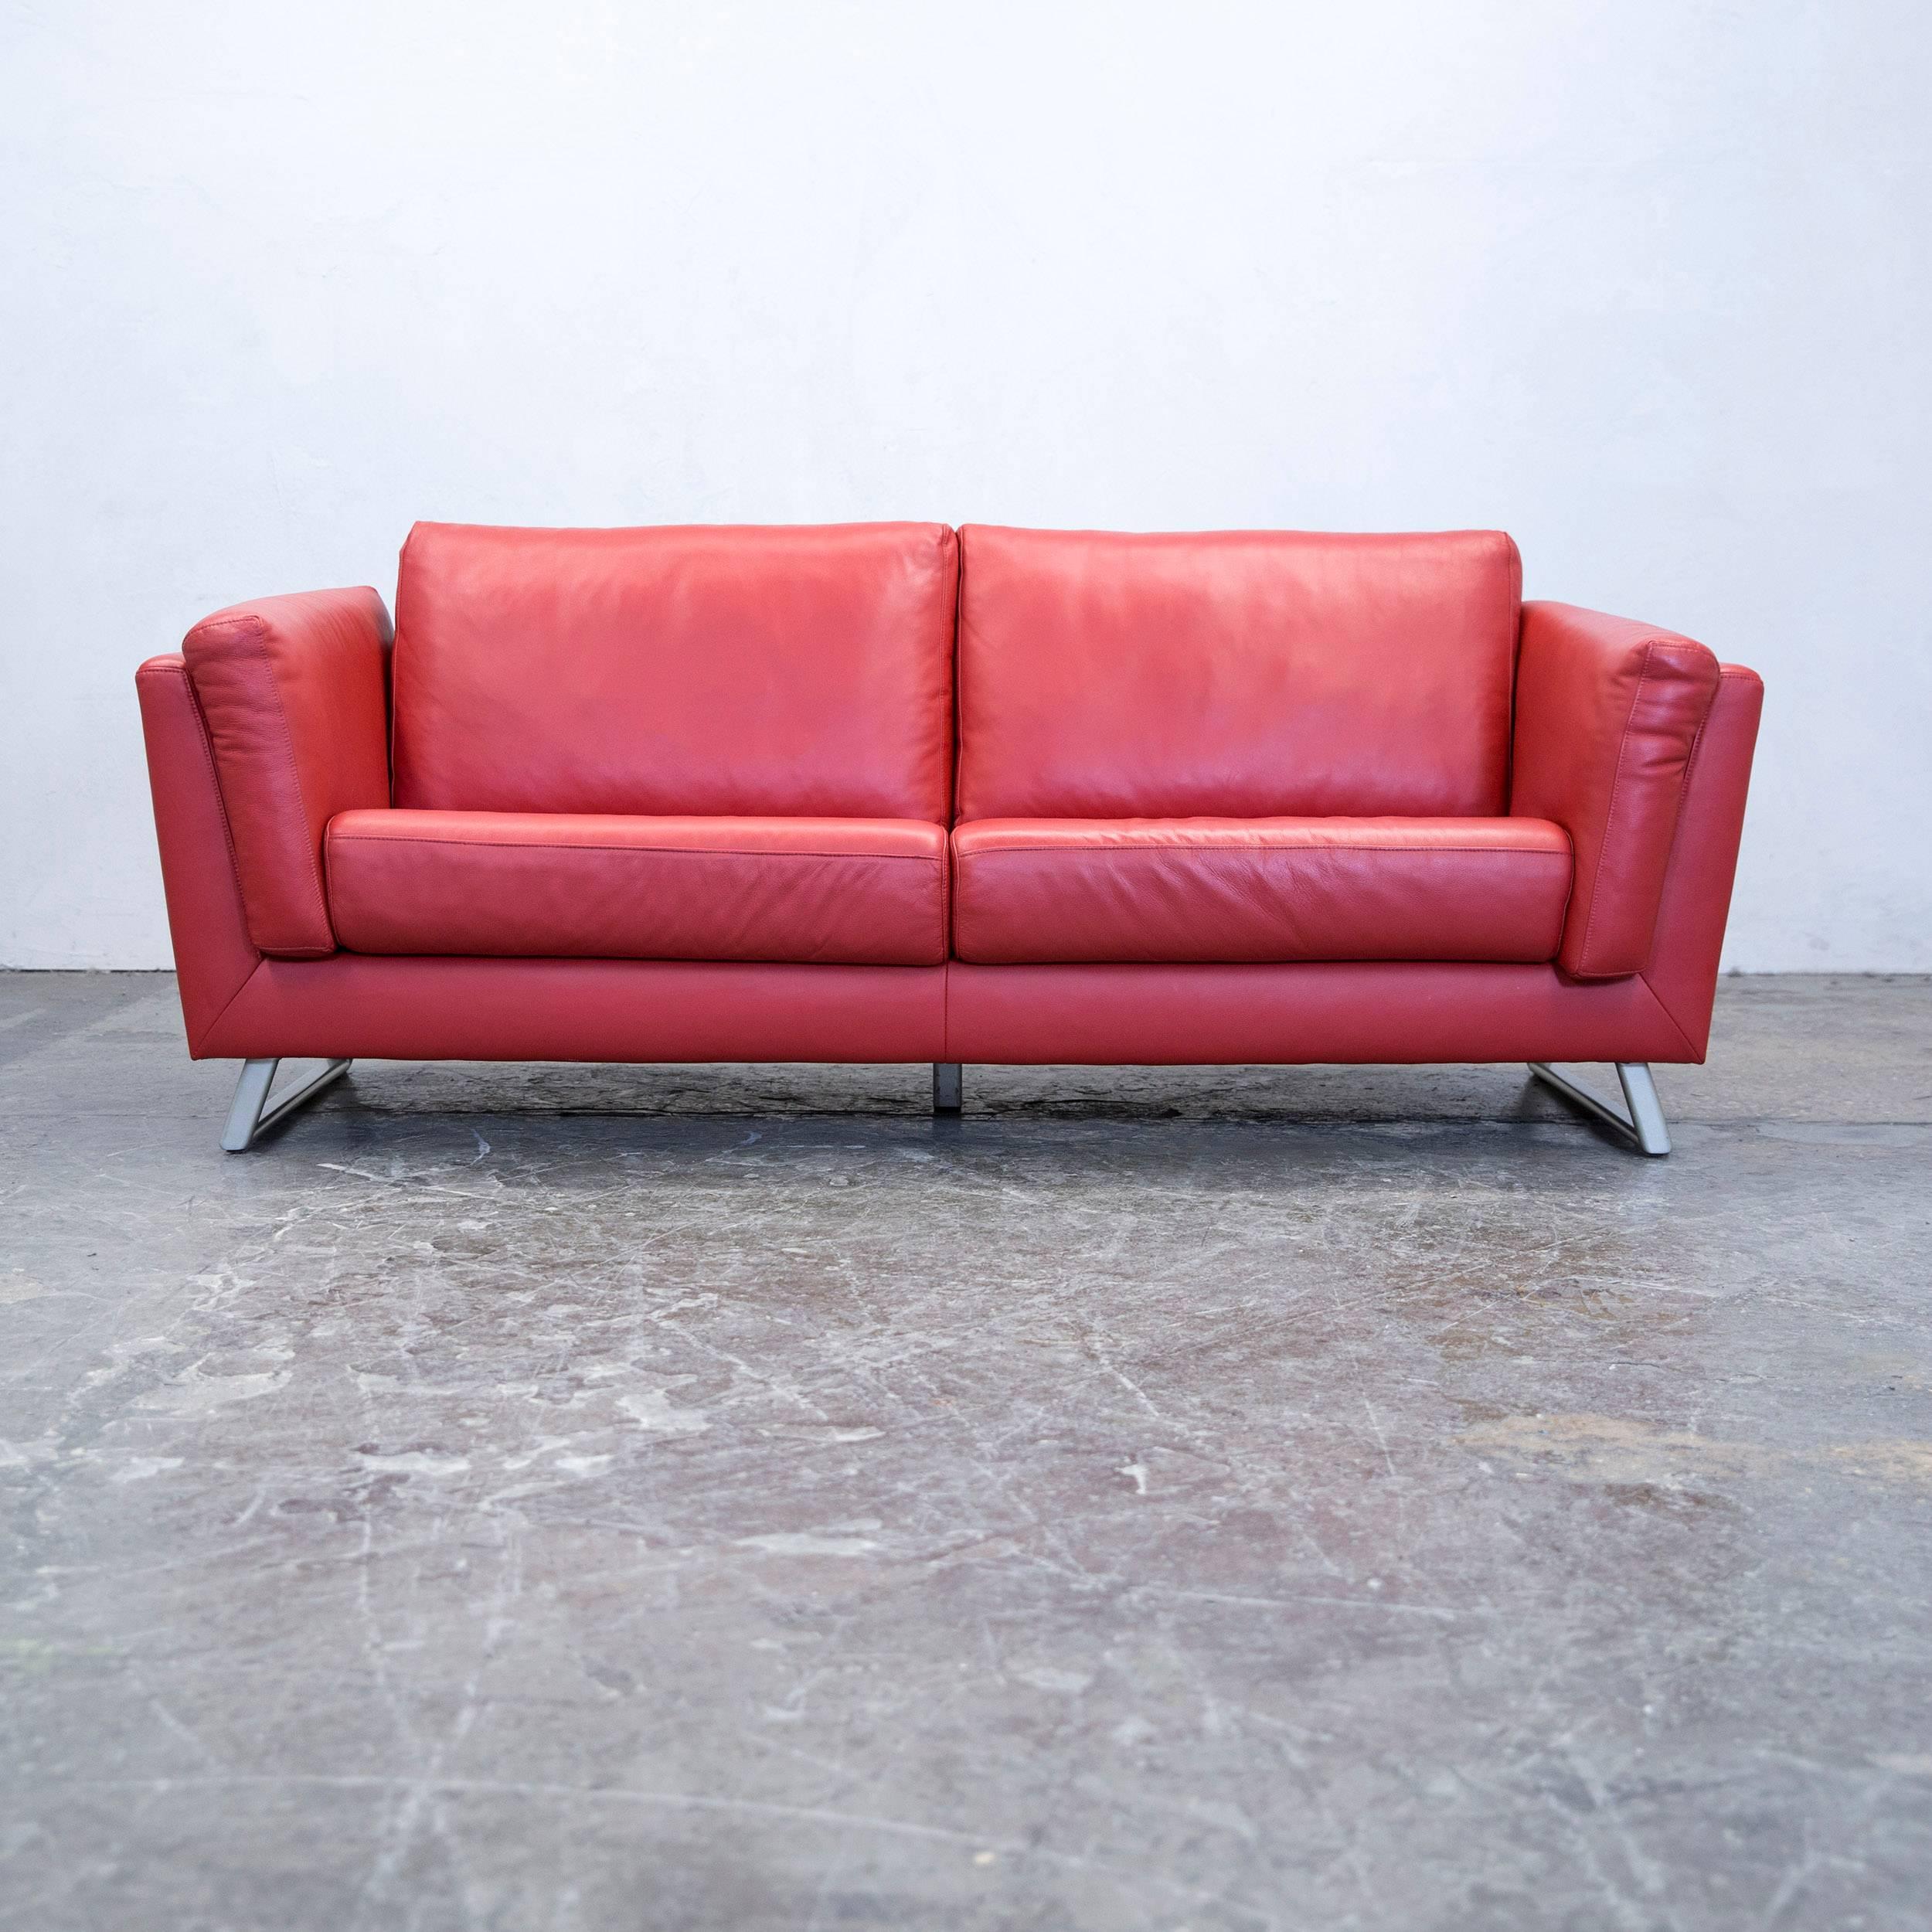 Red colored designer leather sofa and armchair, in a minimalistic and modern design, made for pure comfort.